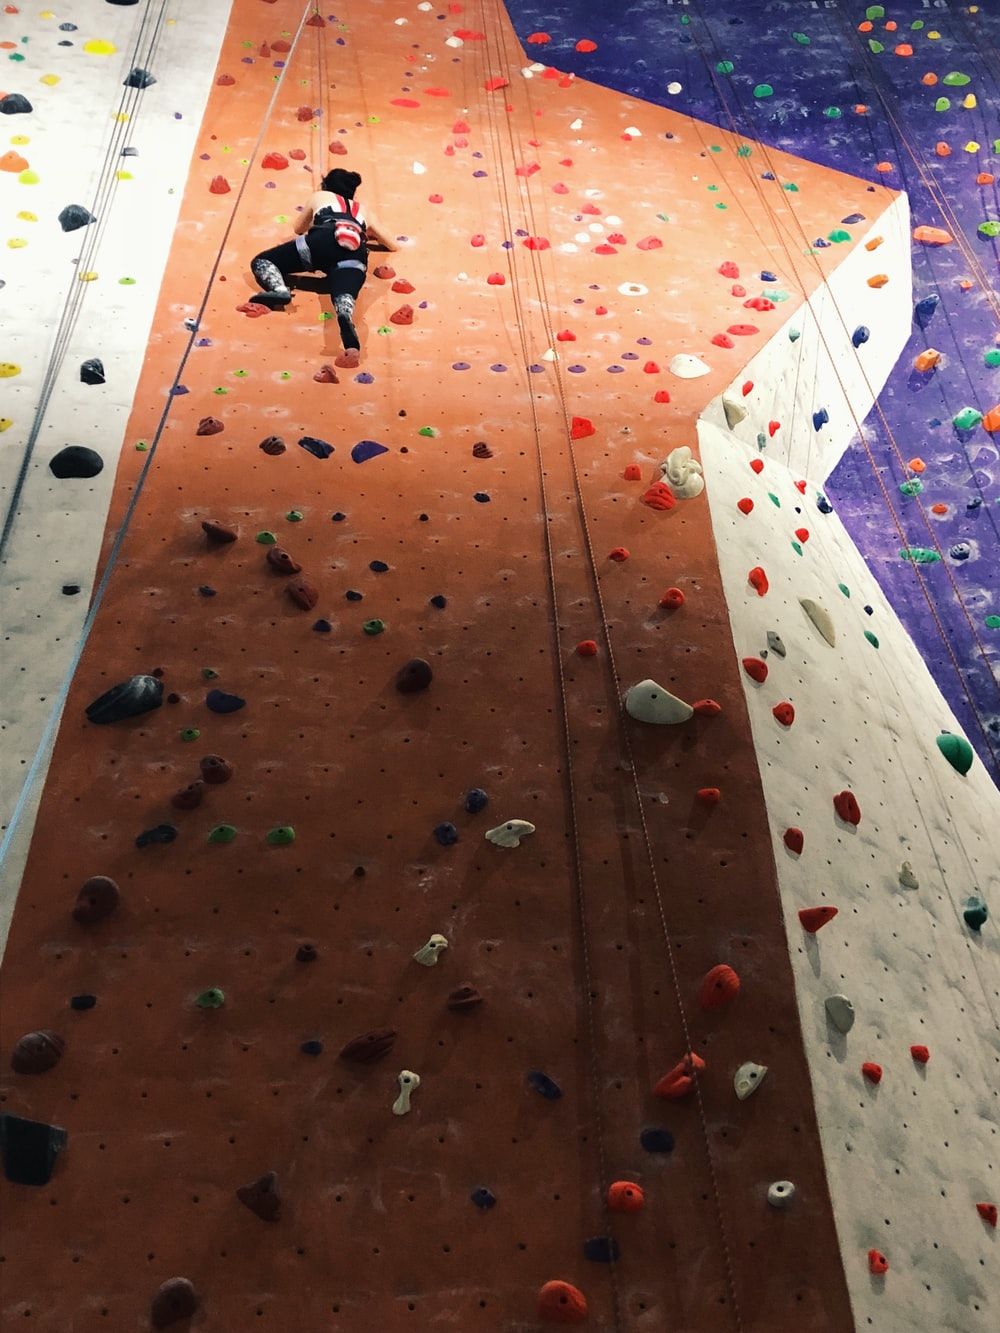 Indoor Rock Climbing Picture. Download Free Image